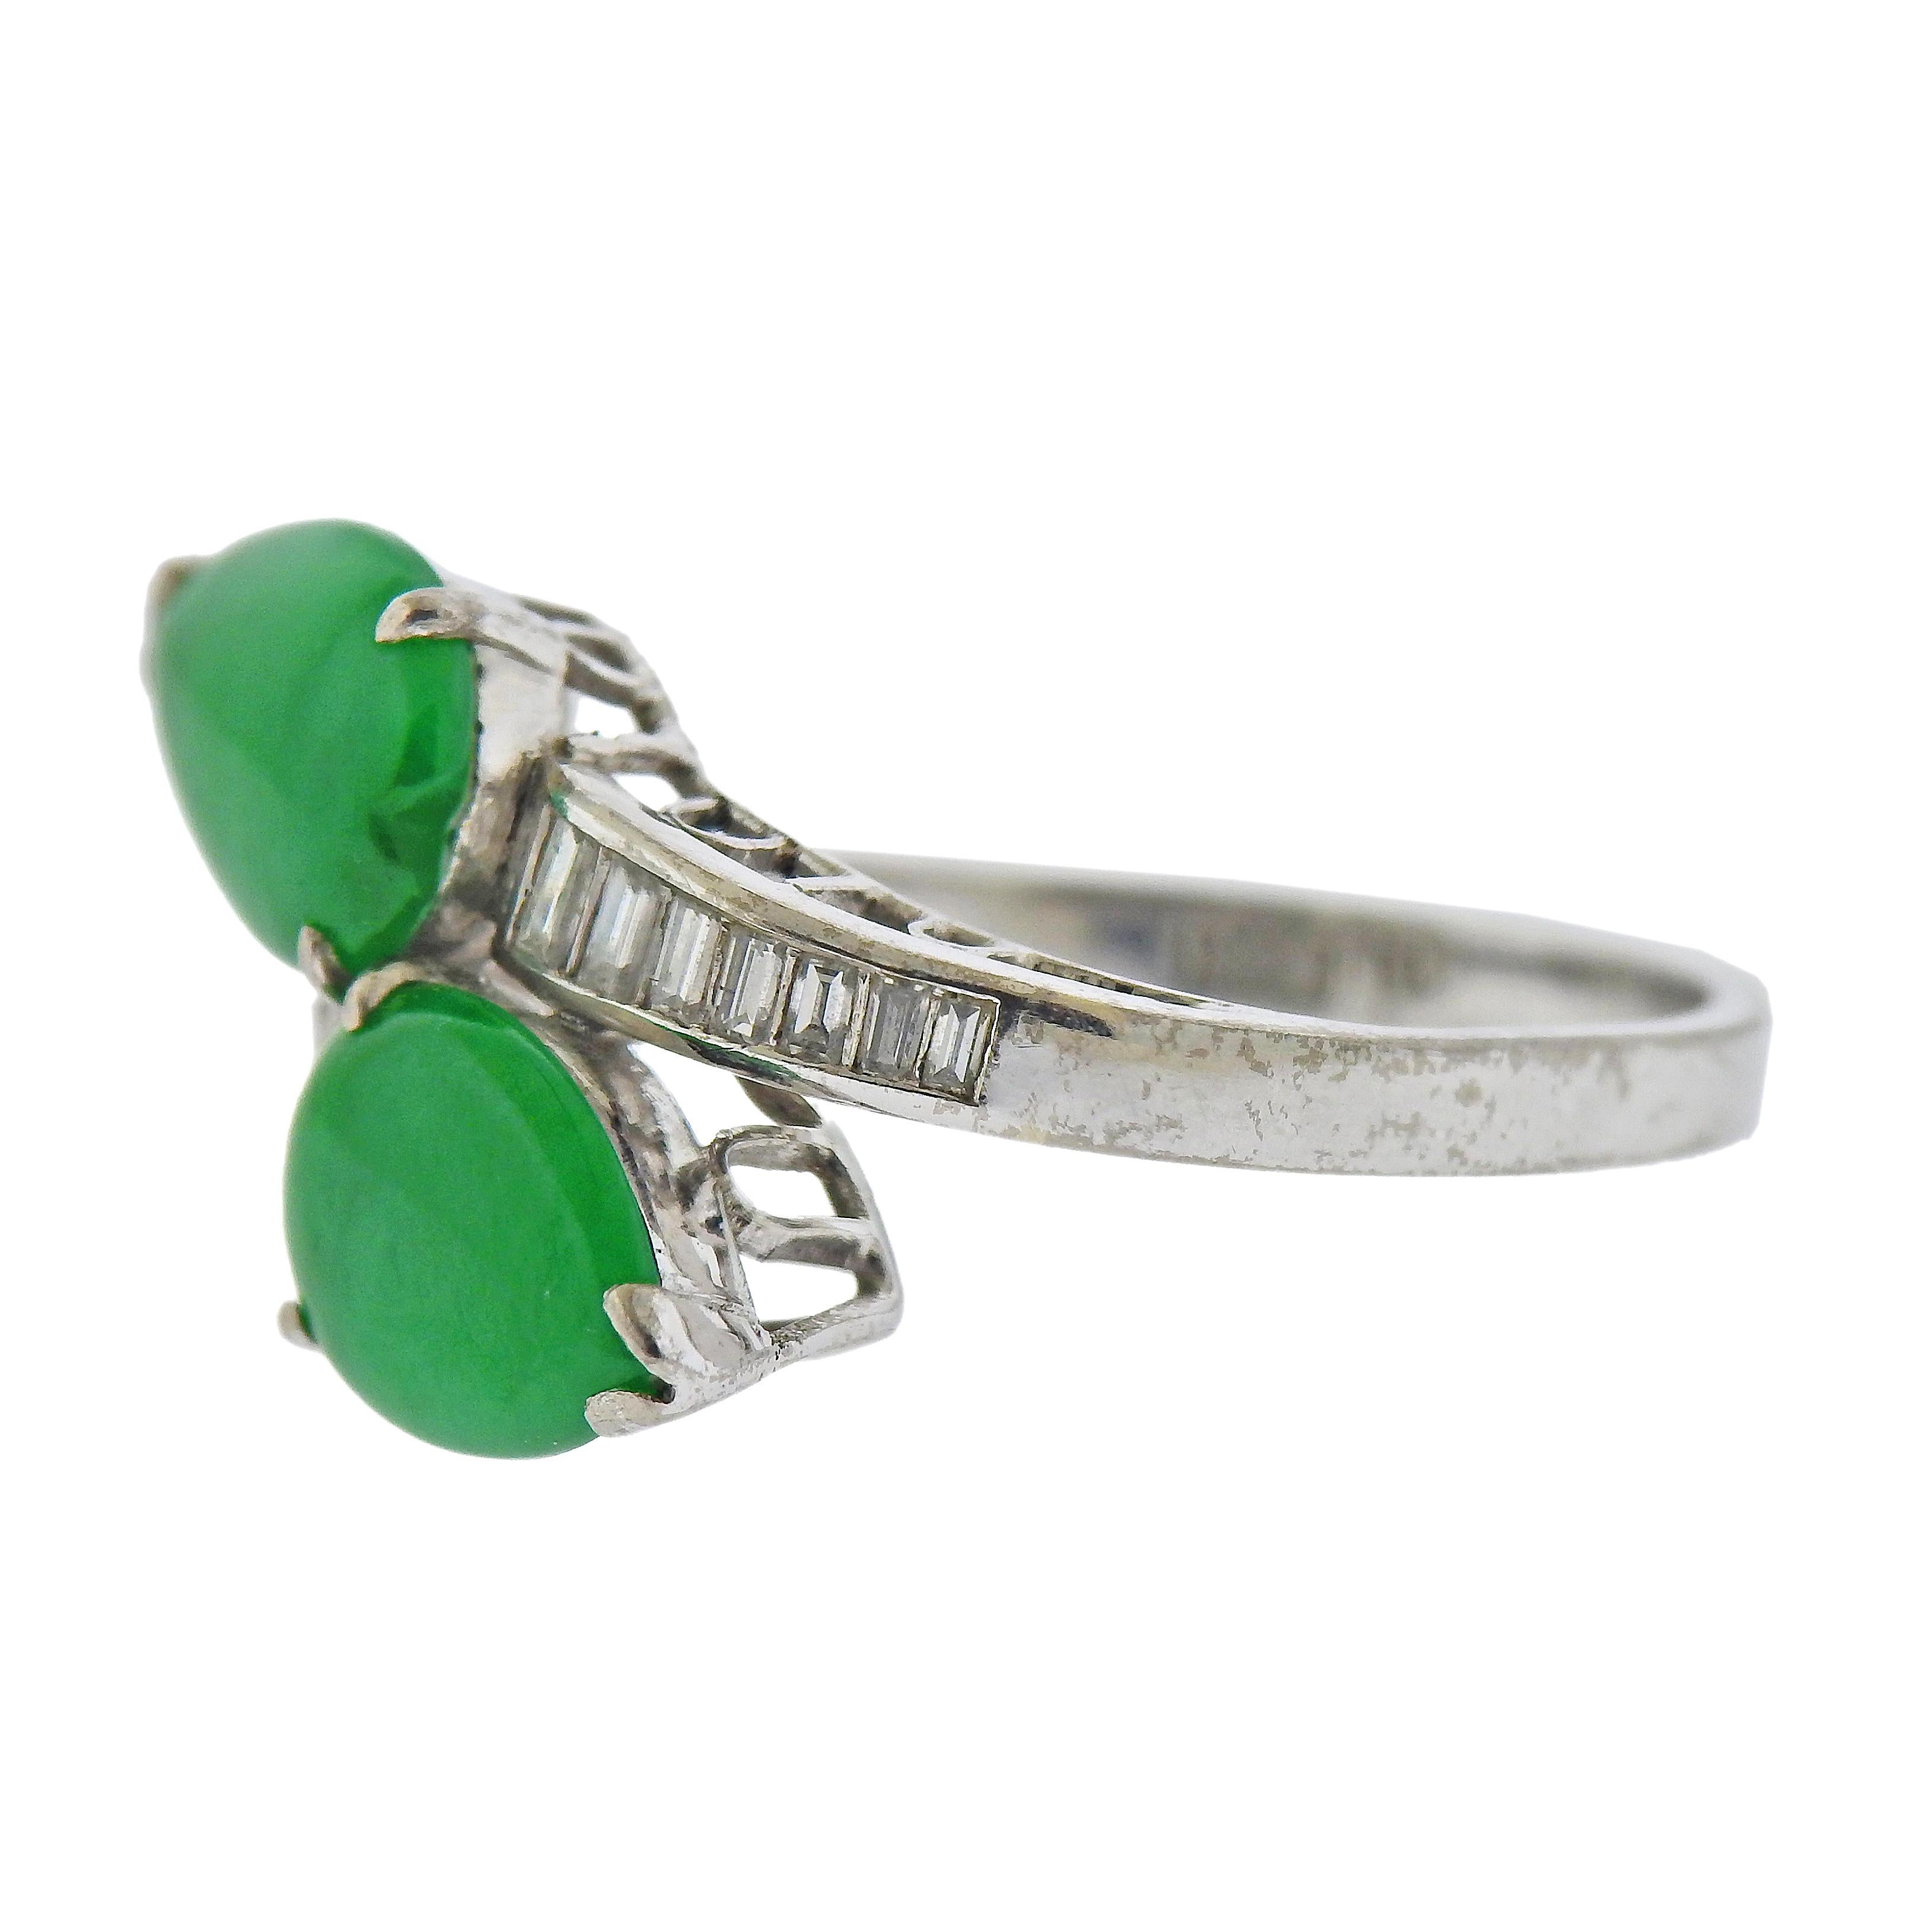 14k white gold bypass ring,  with two pear shaped natural jadeite jade gemstones, measuring 9.5 x 7mm and 7.4 x 6.95mm, surrounded with approx. 0.12ctw in diamonds. Ring size - 7, ring top - 15mm wide. Marked: 14k. Weight - 4.2 grams. 